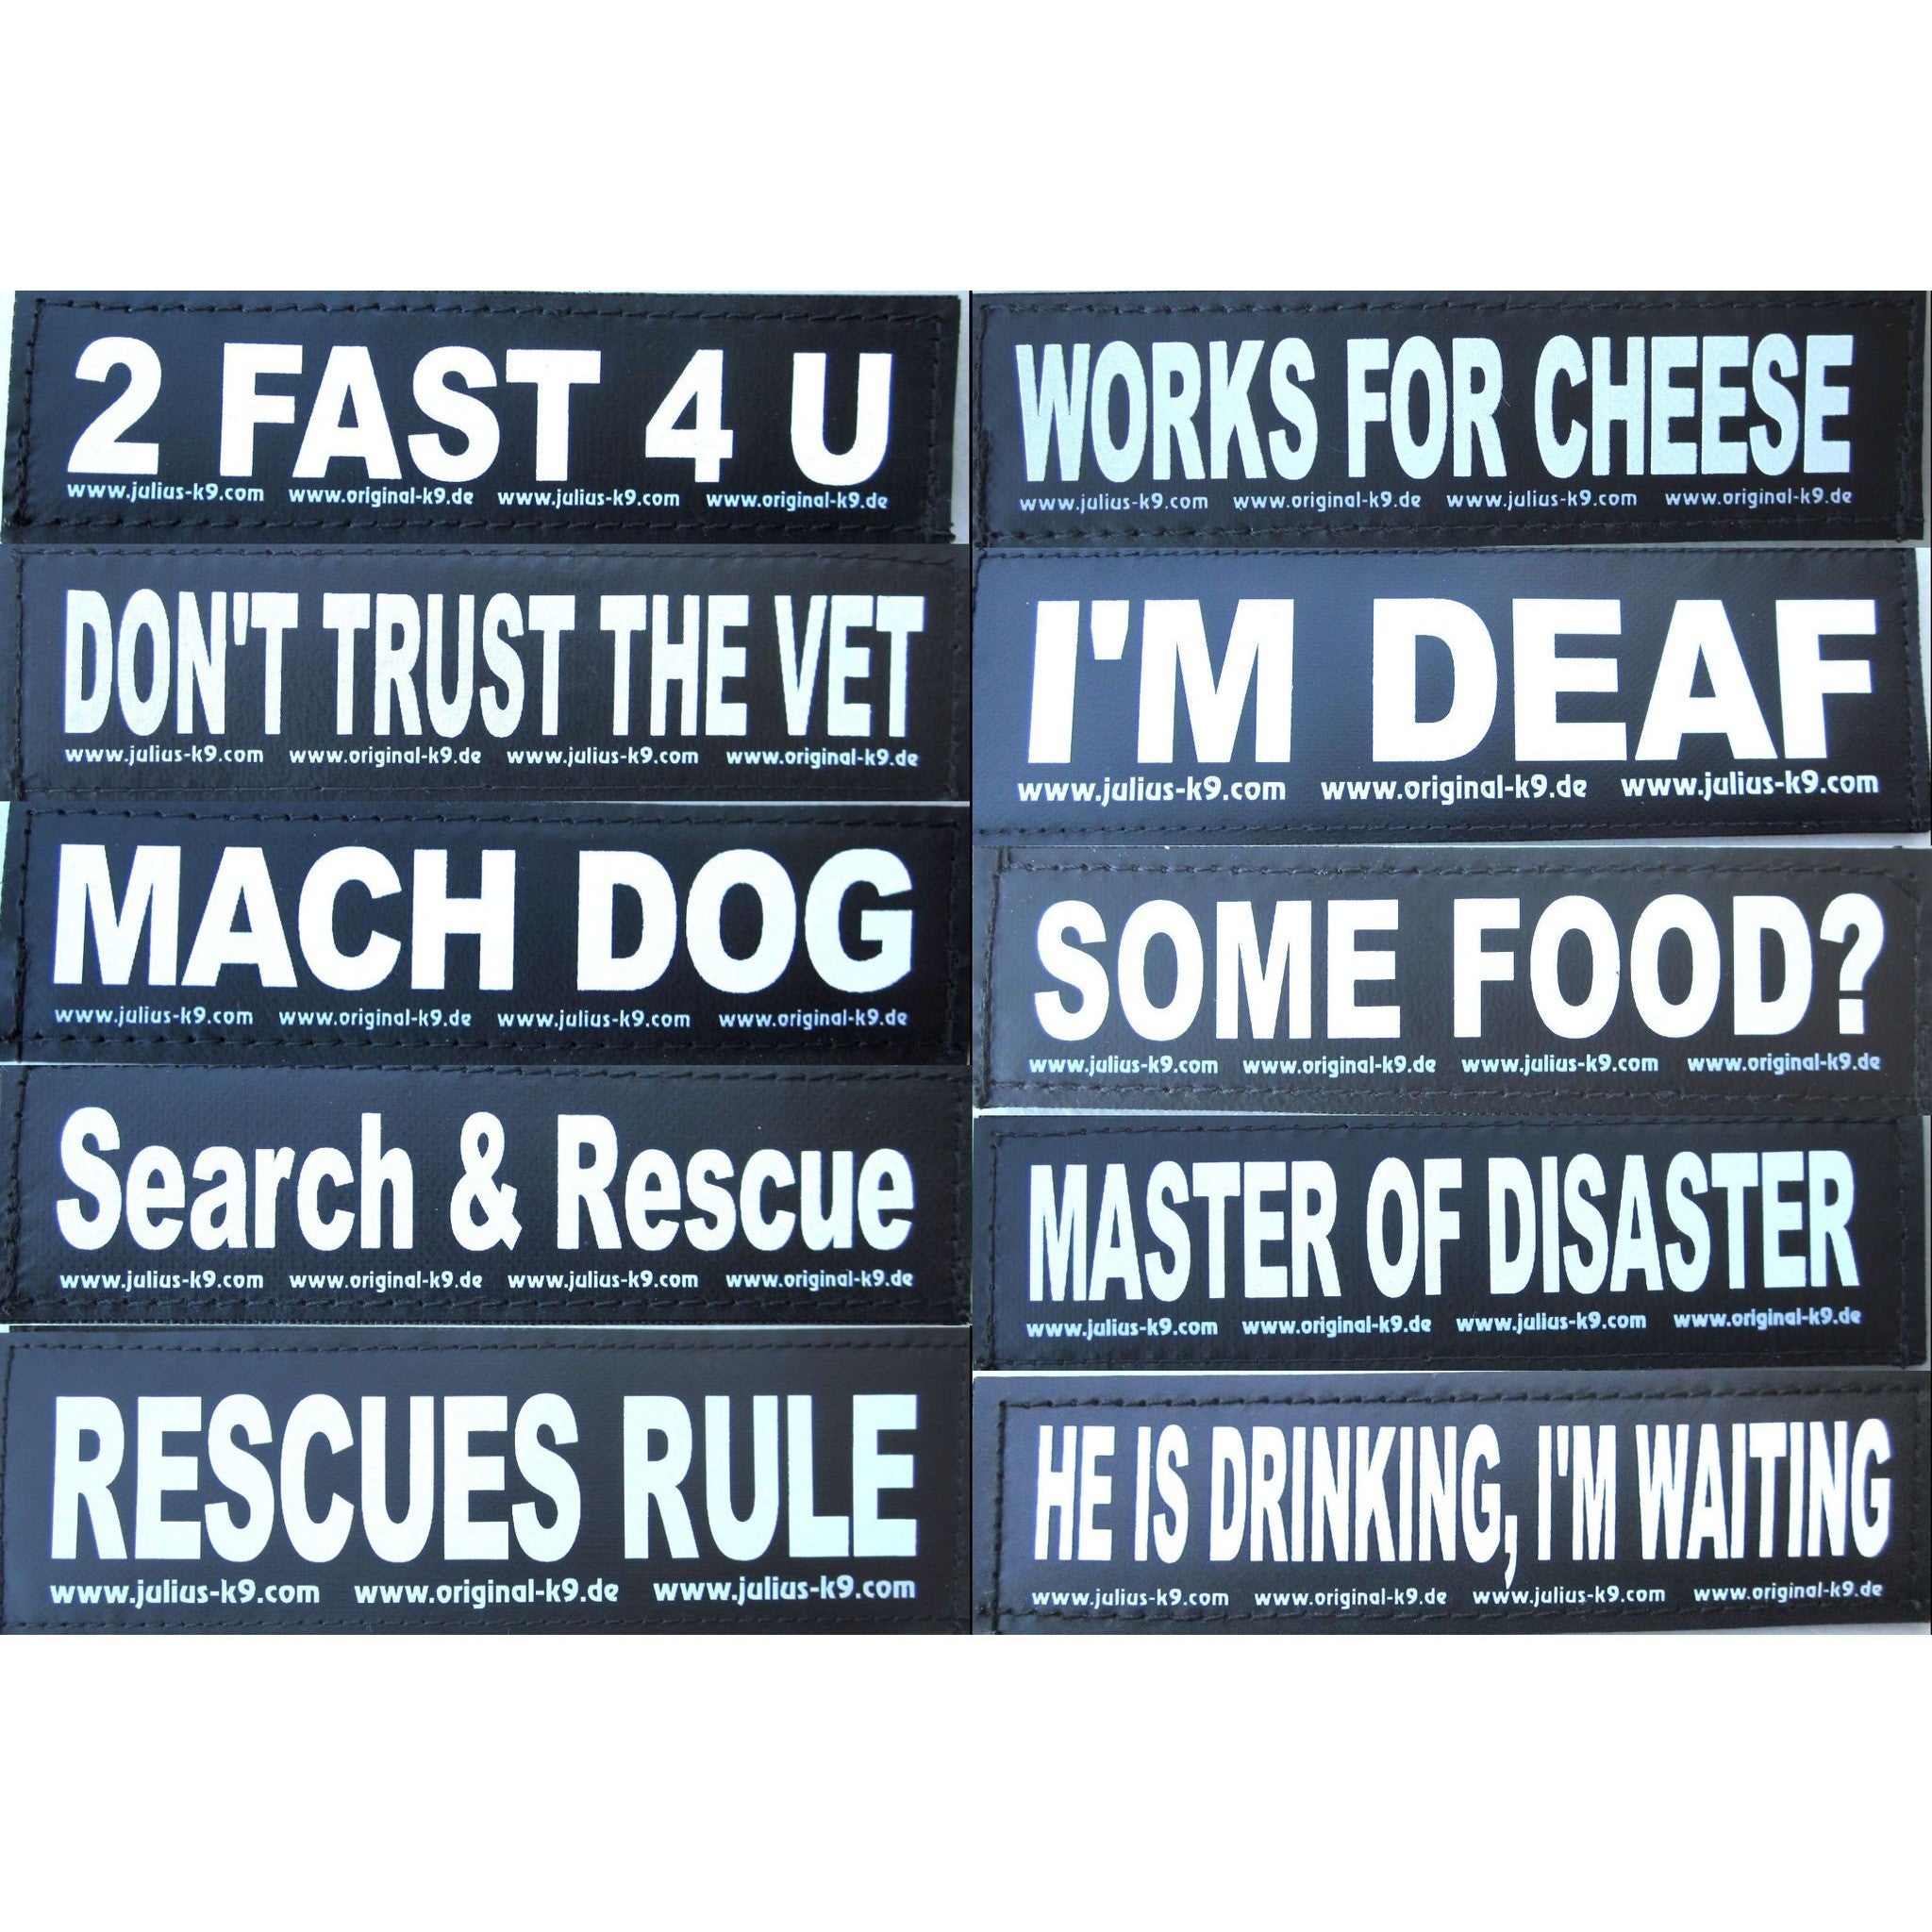 Service DOG THERAPY PET Patch Medic Working Dog In Training Emblem Badge K9  K-9 Patch